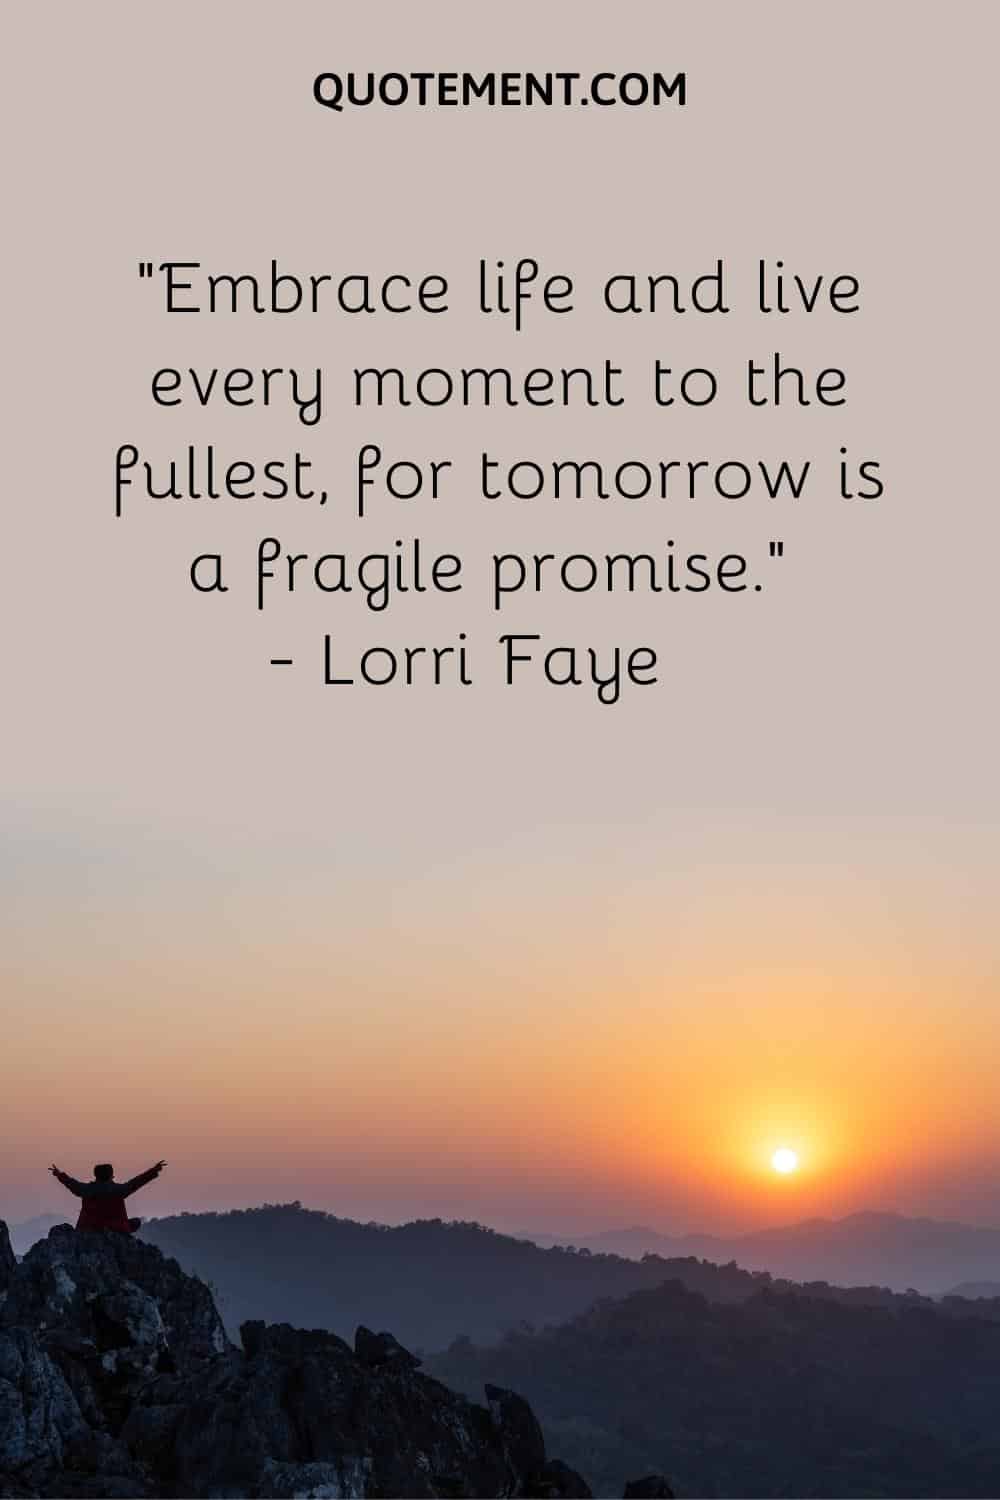 Embrace life and live every moment to the fullest, for tomorrow is a fragile promise